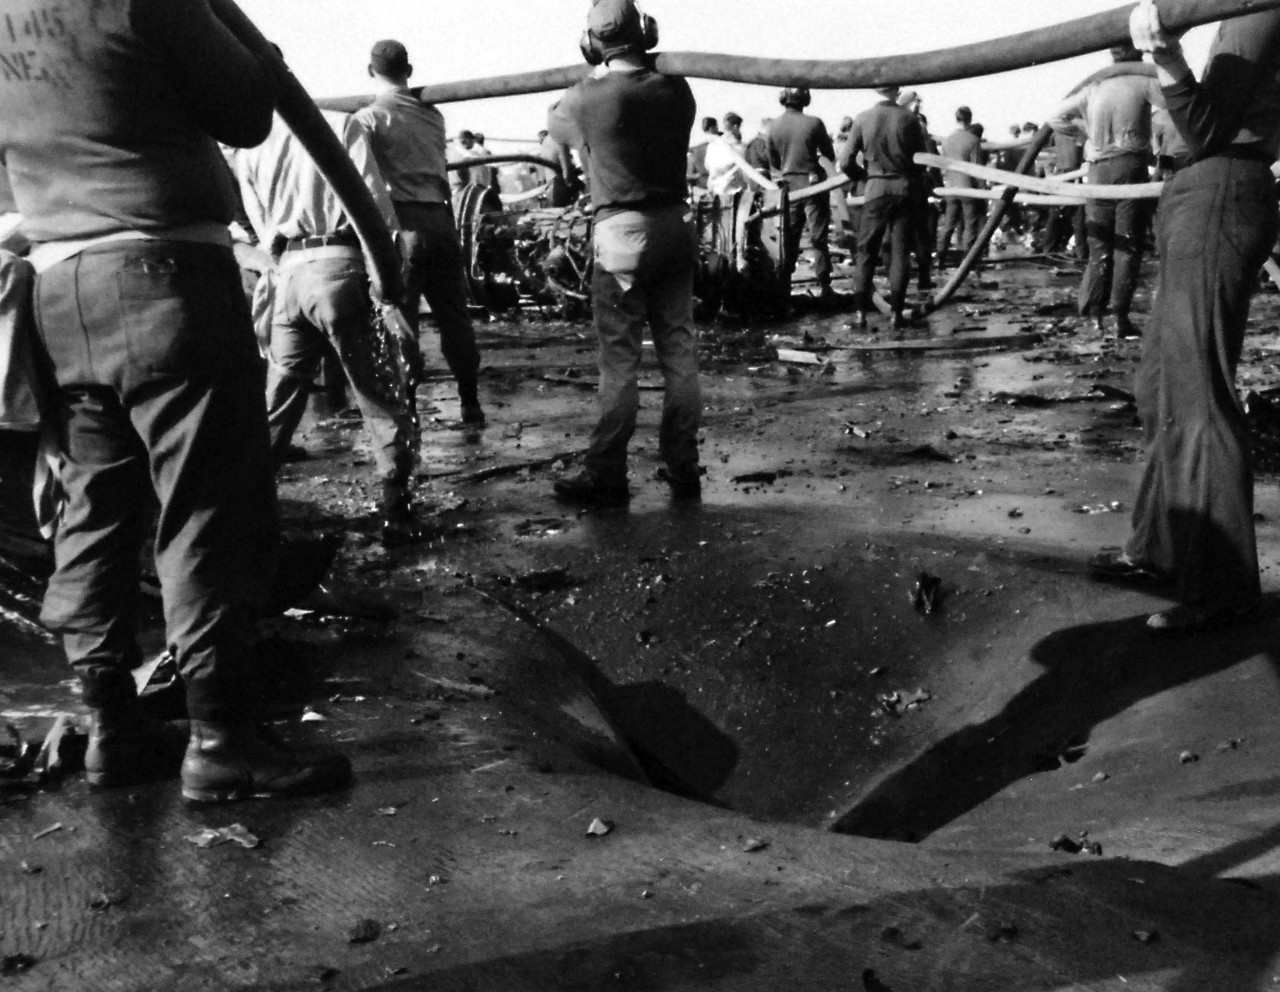 428-GX-USN-1140815:     USS Enterprise (CVAN-65), January 1969.     Pacific Ocean.  Crewmen of USS Enterprise (CVN 65) man hoses to fight a fire on the fight deck.  A bomb hole, in the foreground, is part of the damage which was caused during the fire which broke out as the ship was conducting air operations 75 miles south of Pearl Harbor.  Photographed by PH1 W.R. Dappen, January 14, 1969.       Official U.S. Navy photograph, now in the collections of the National Archives.   (2016/07/26).